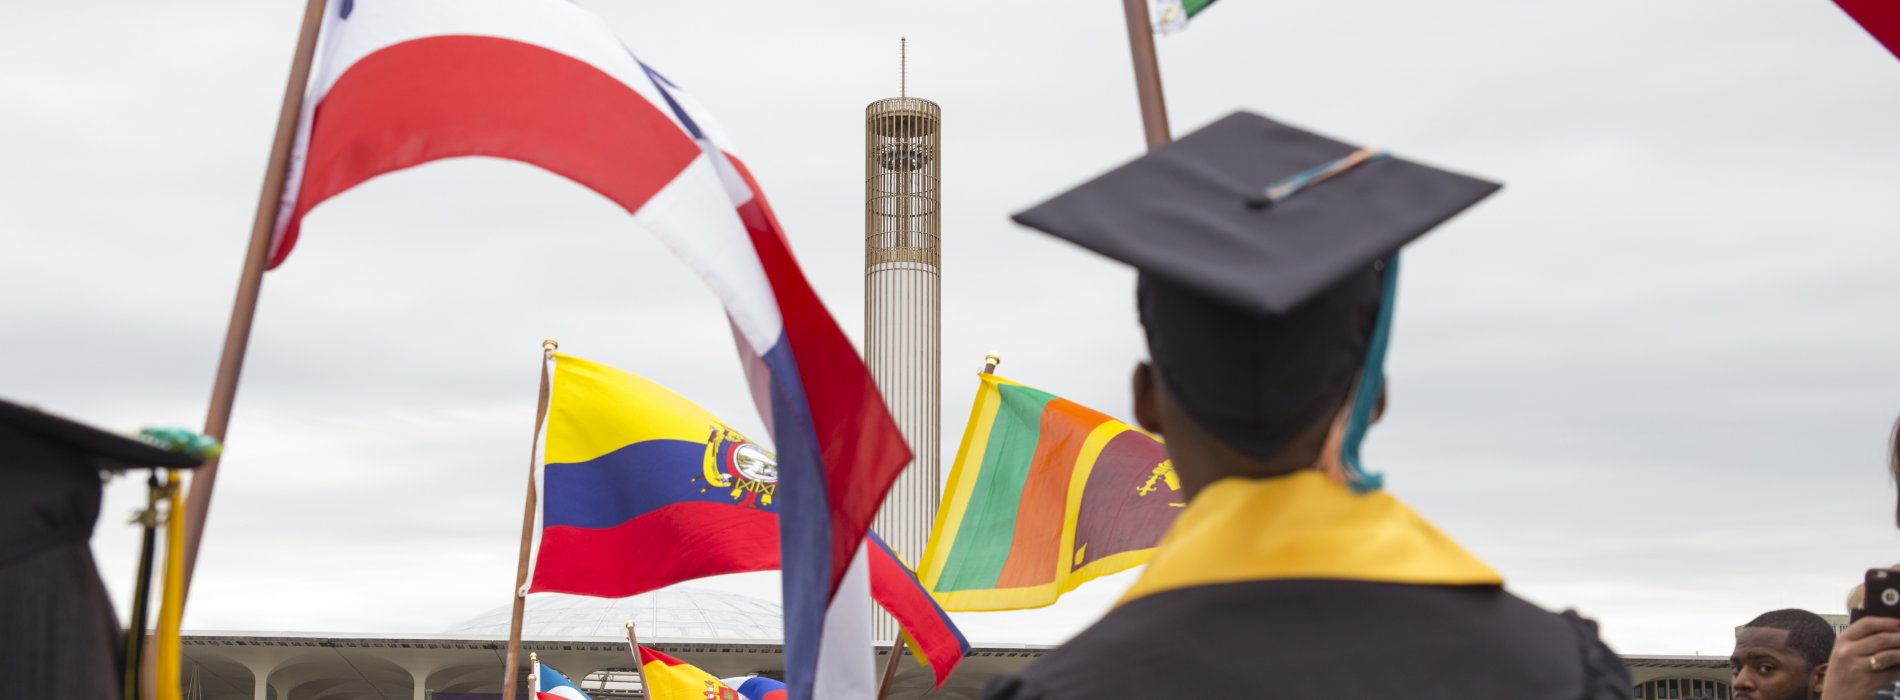 International students carry flags at Commencement